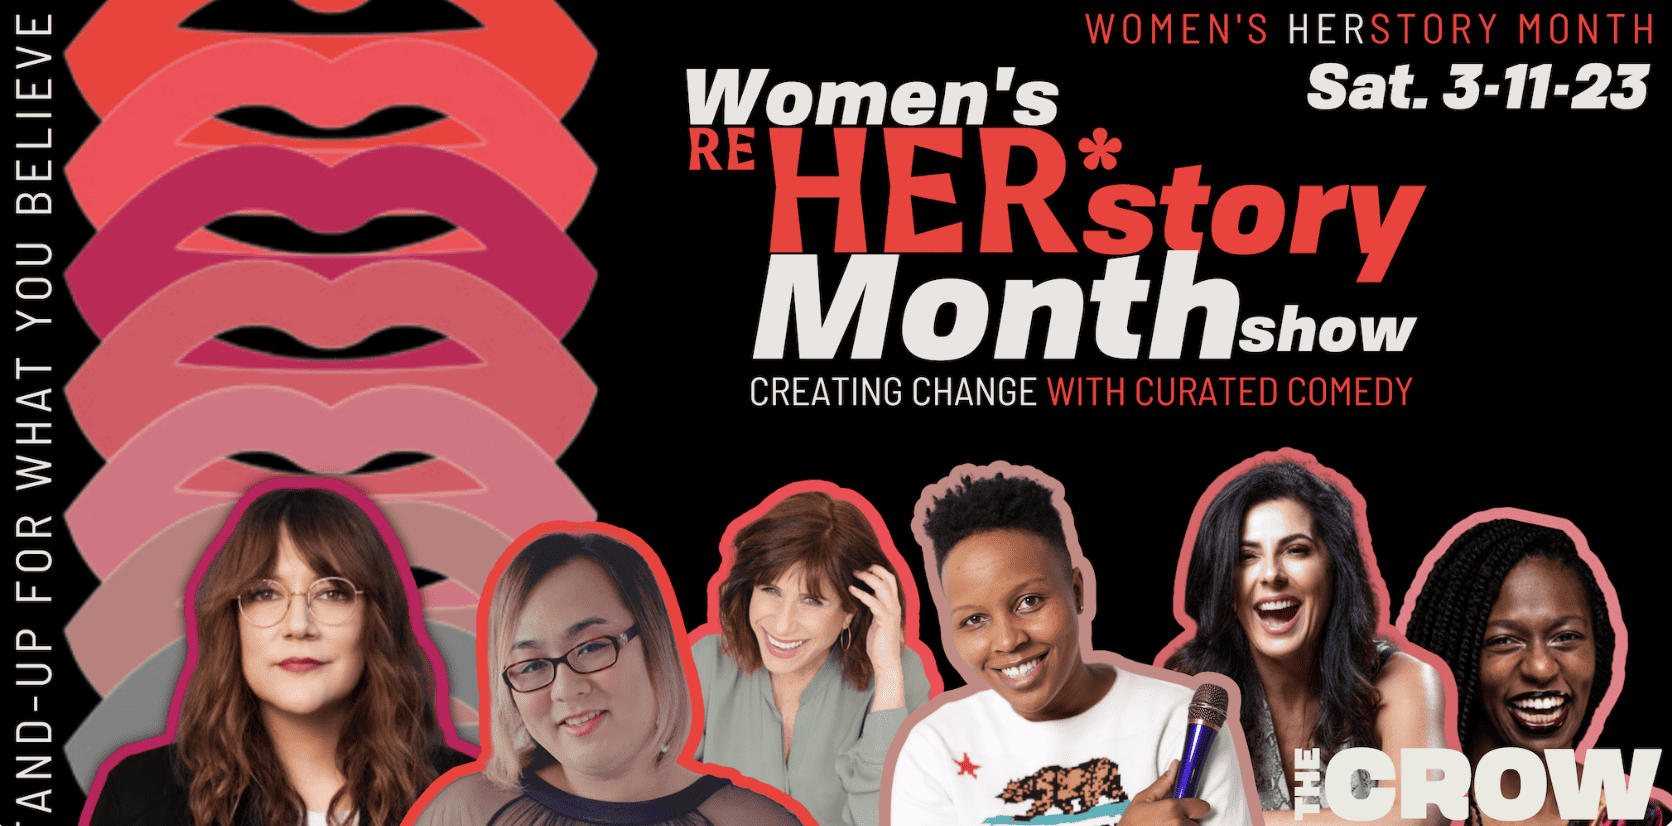 Women's RE:HERstory Month Fundraising Event & Comedy Show